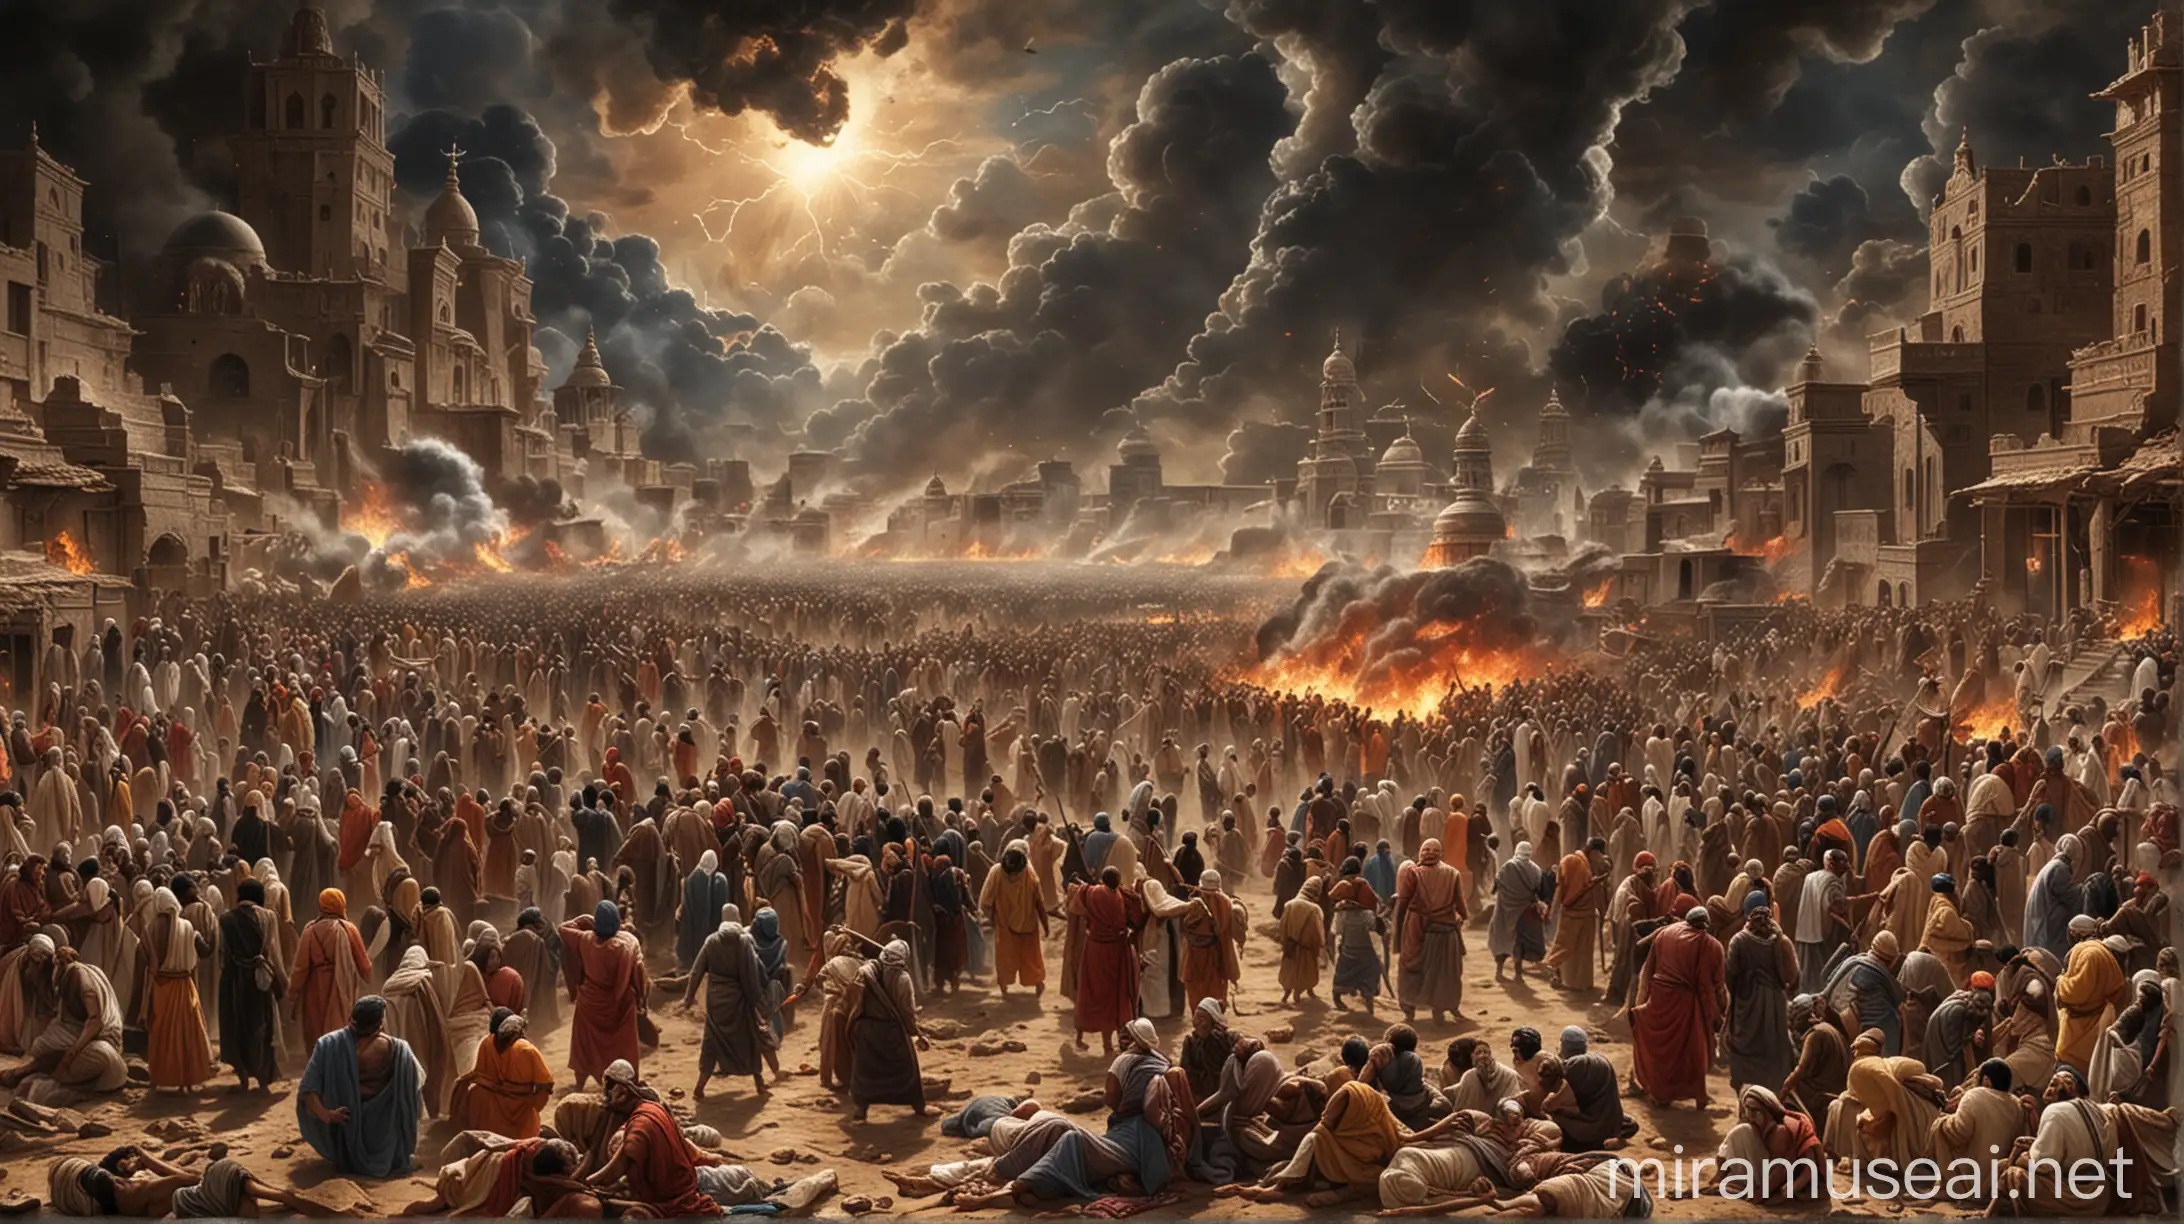 End-Time Chaos Caused by Yajuj and Majuj:

Description: A chaotic and apocalyptic scene depicting Yajuj and Majuj unleashed, causing widespread destruction. Rivers are drying up, cities are in ruins, and people are fleeing in terror, highlighting the prophesied havoc before the Day of Judgment.